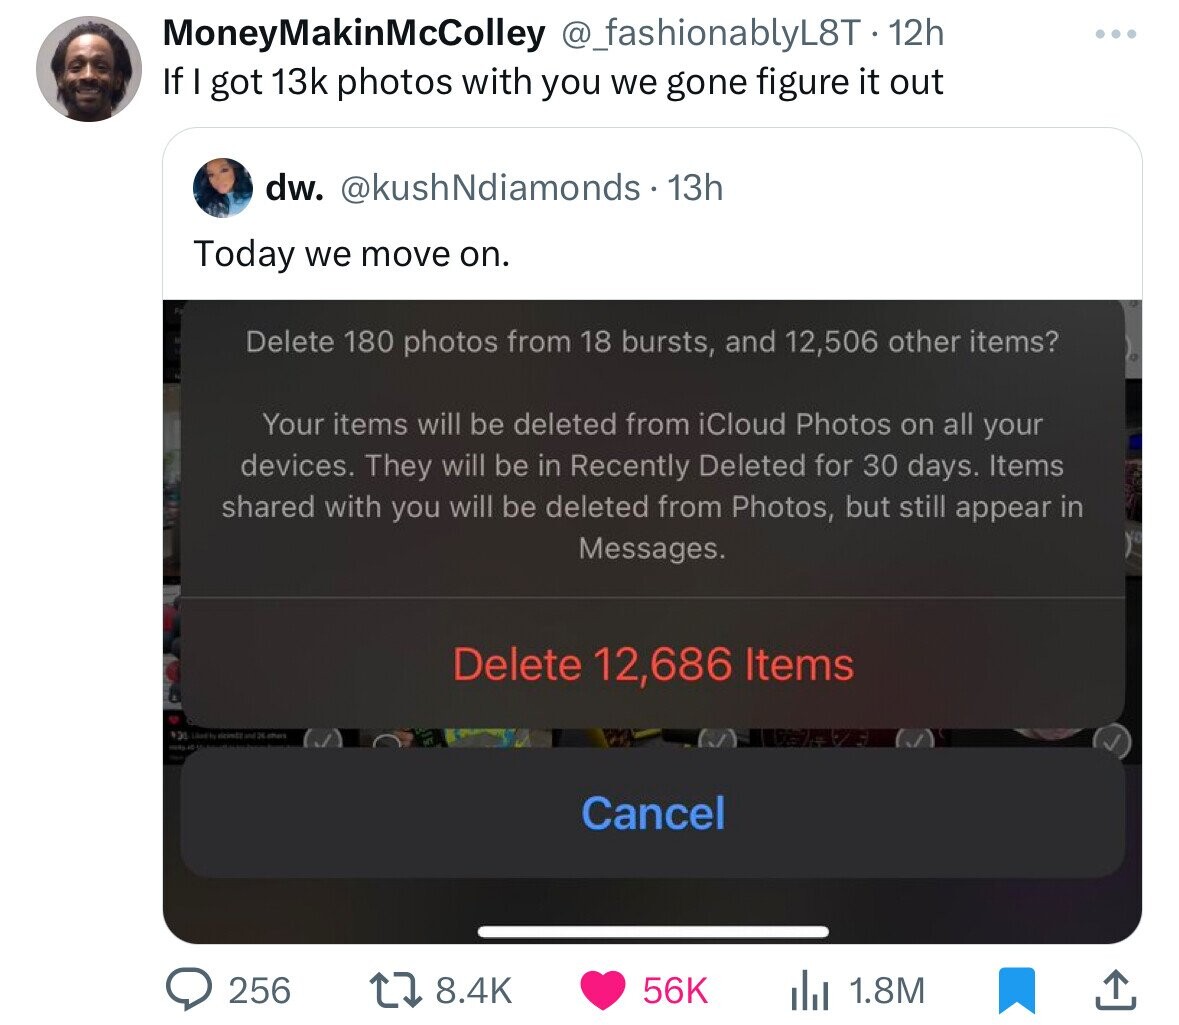 elon musk washington post tweet - MoneyMakinMcColley 12h If I got 13k photos with you we gone figure it out dw. 13h Today we move on. Delete 180 photos from 18 bursts, and 12,506 other items? Your items will be deleted from iCloud Photos on all your devic